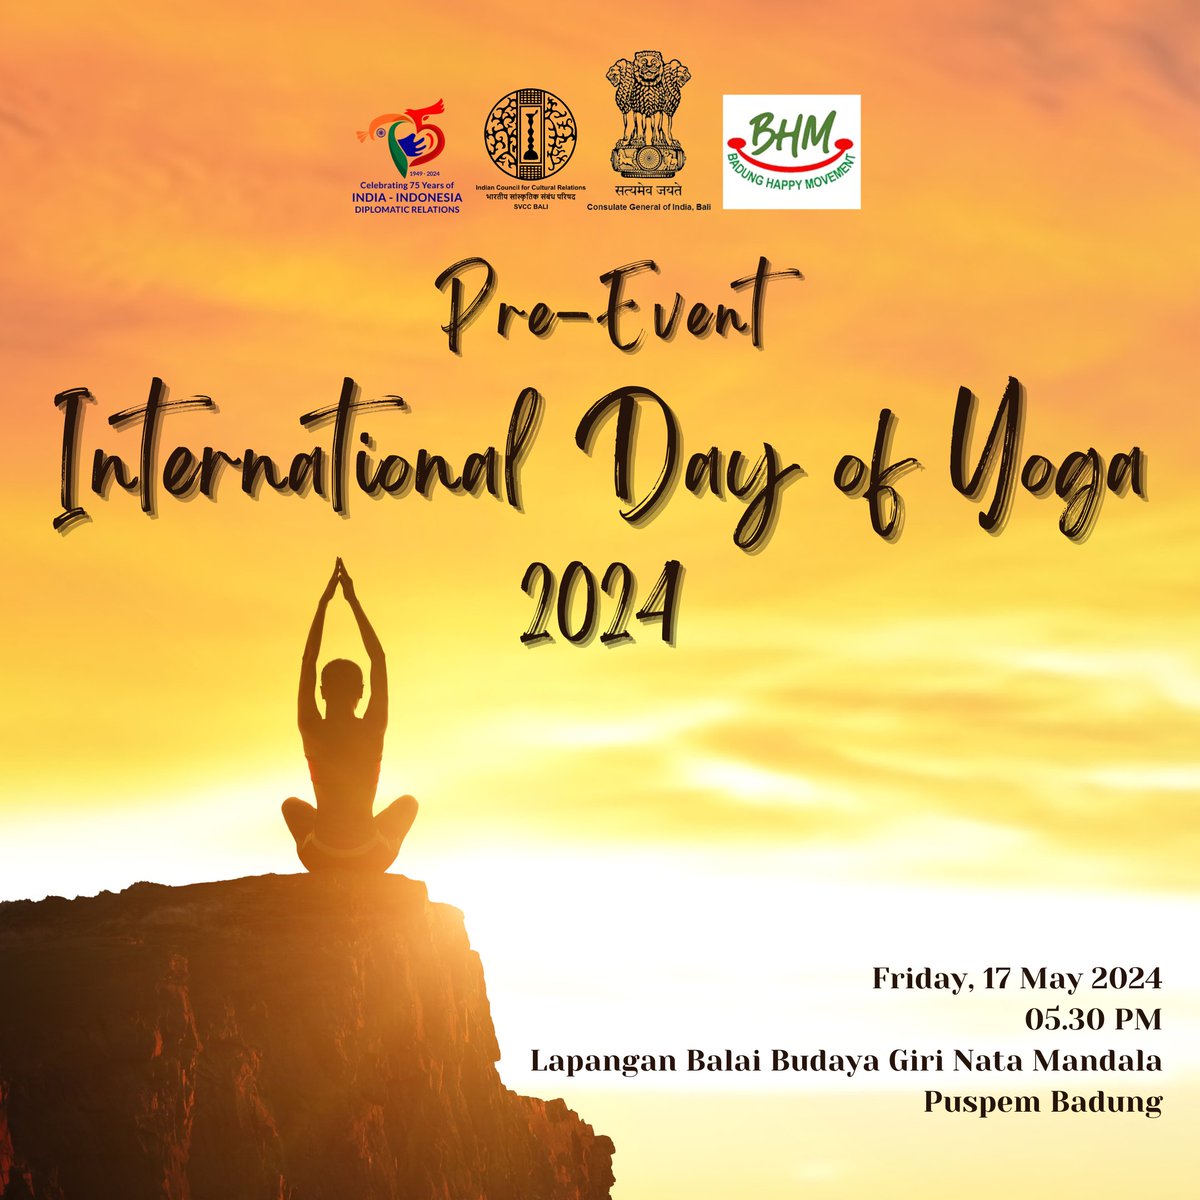 Road to pre-event #IDY in Bali's regencies. You are cordially invited to join us in the first event of Yog yatra in Badung Regency. Experience authentic Indian yoga and peace of mind by joining our yoga event on Friday, 17/05/24 in Puspem Badung at 5.30PM. #75indiaindonesia